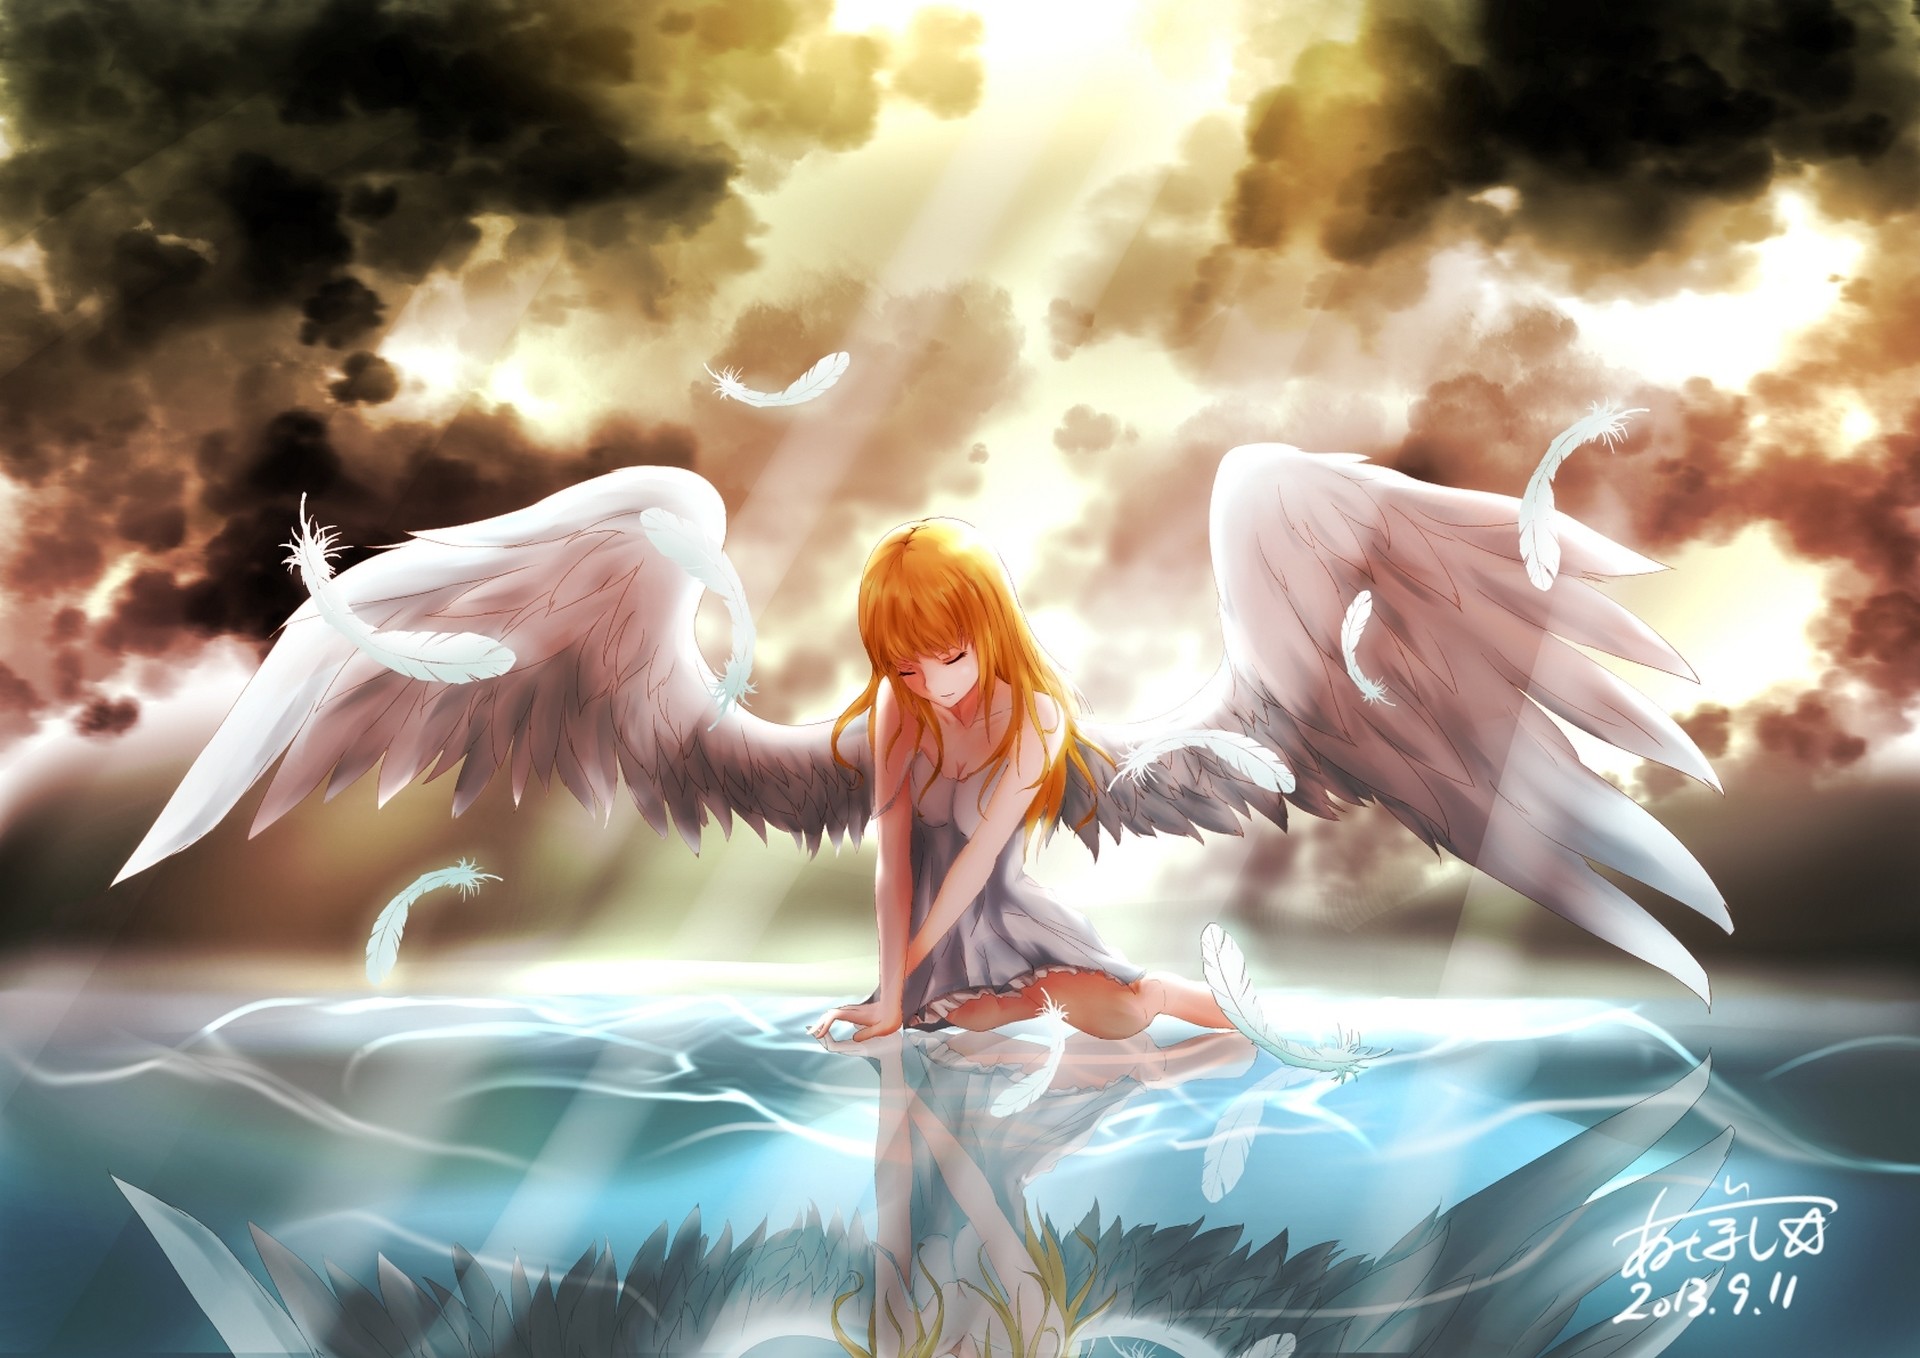 1920x1358 ... wallpaper Â· angel with white wings looks at hers reflection in the  water underwater sun rays Anime Artwork